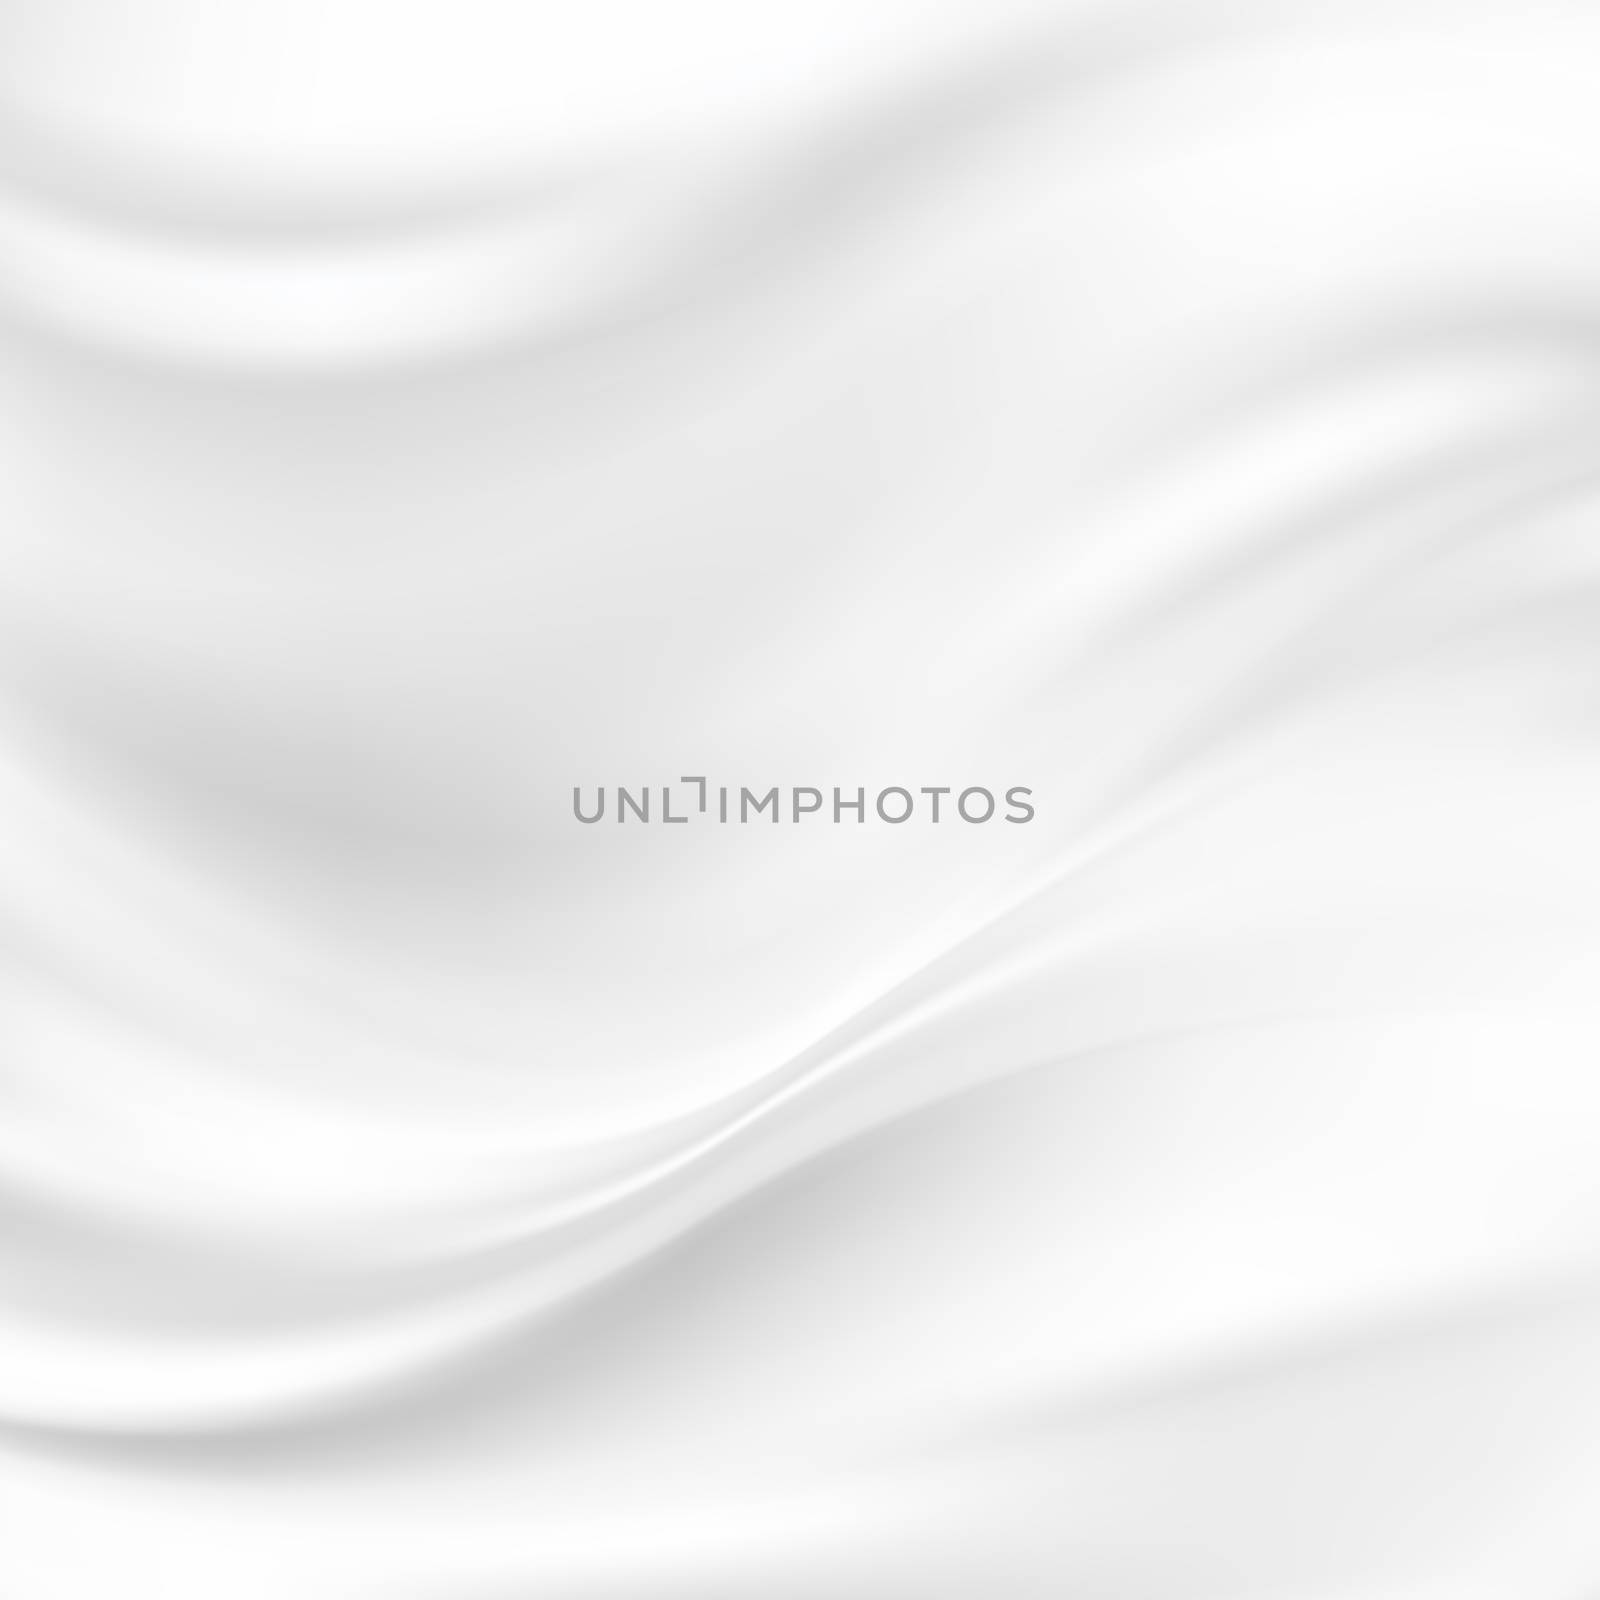 White Silk Background by epic33